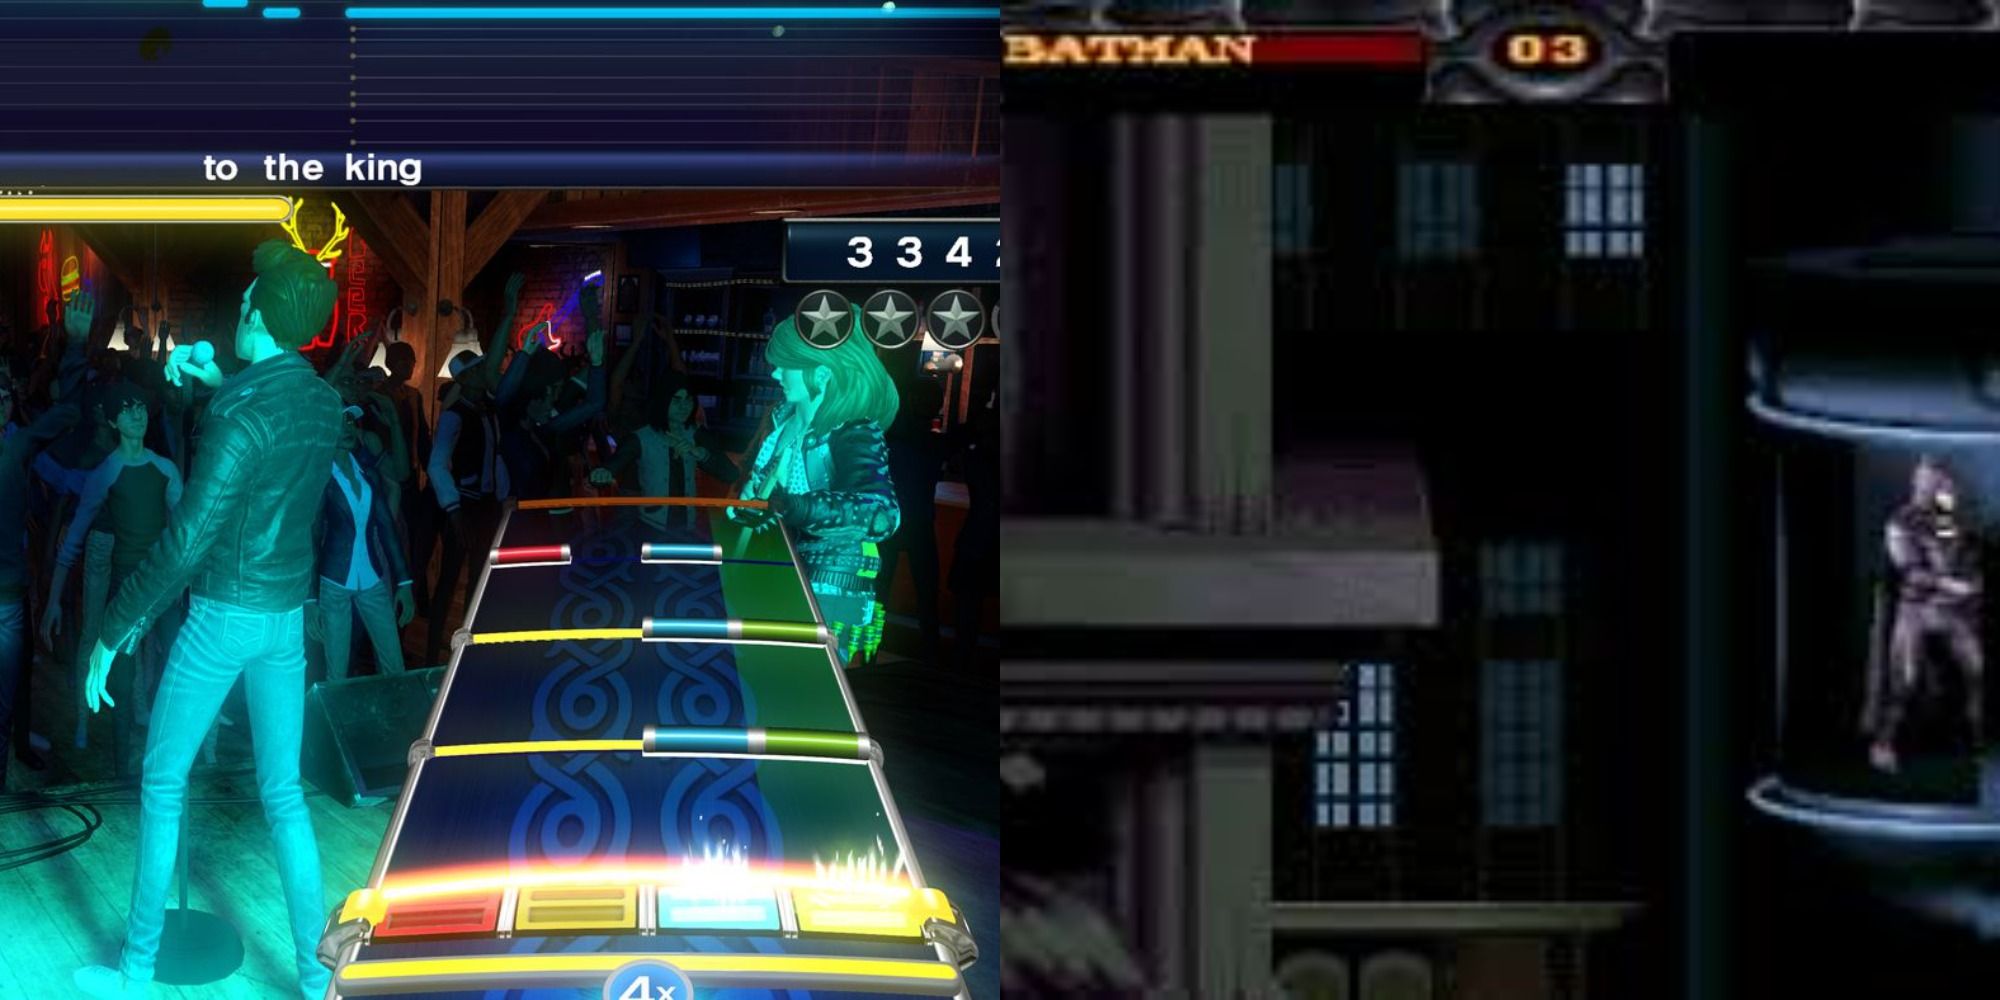 An image of Rock Band gameplay and Batman Forever